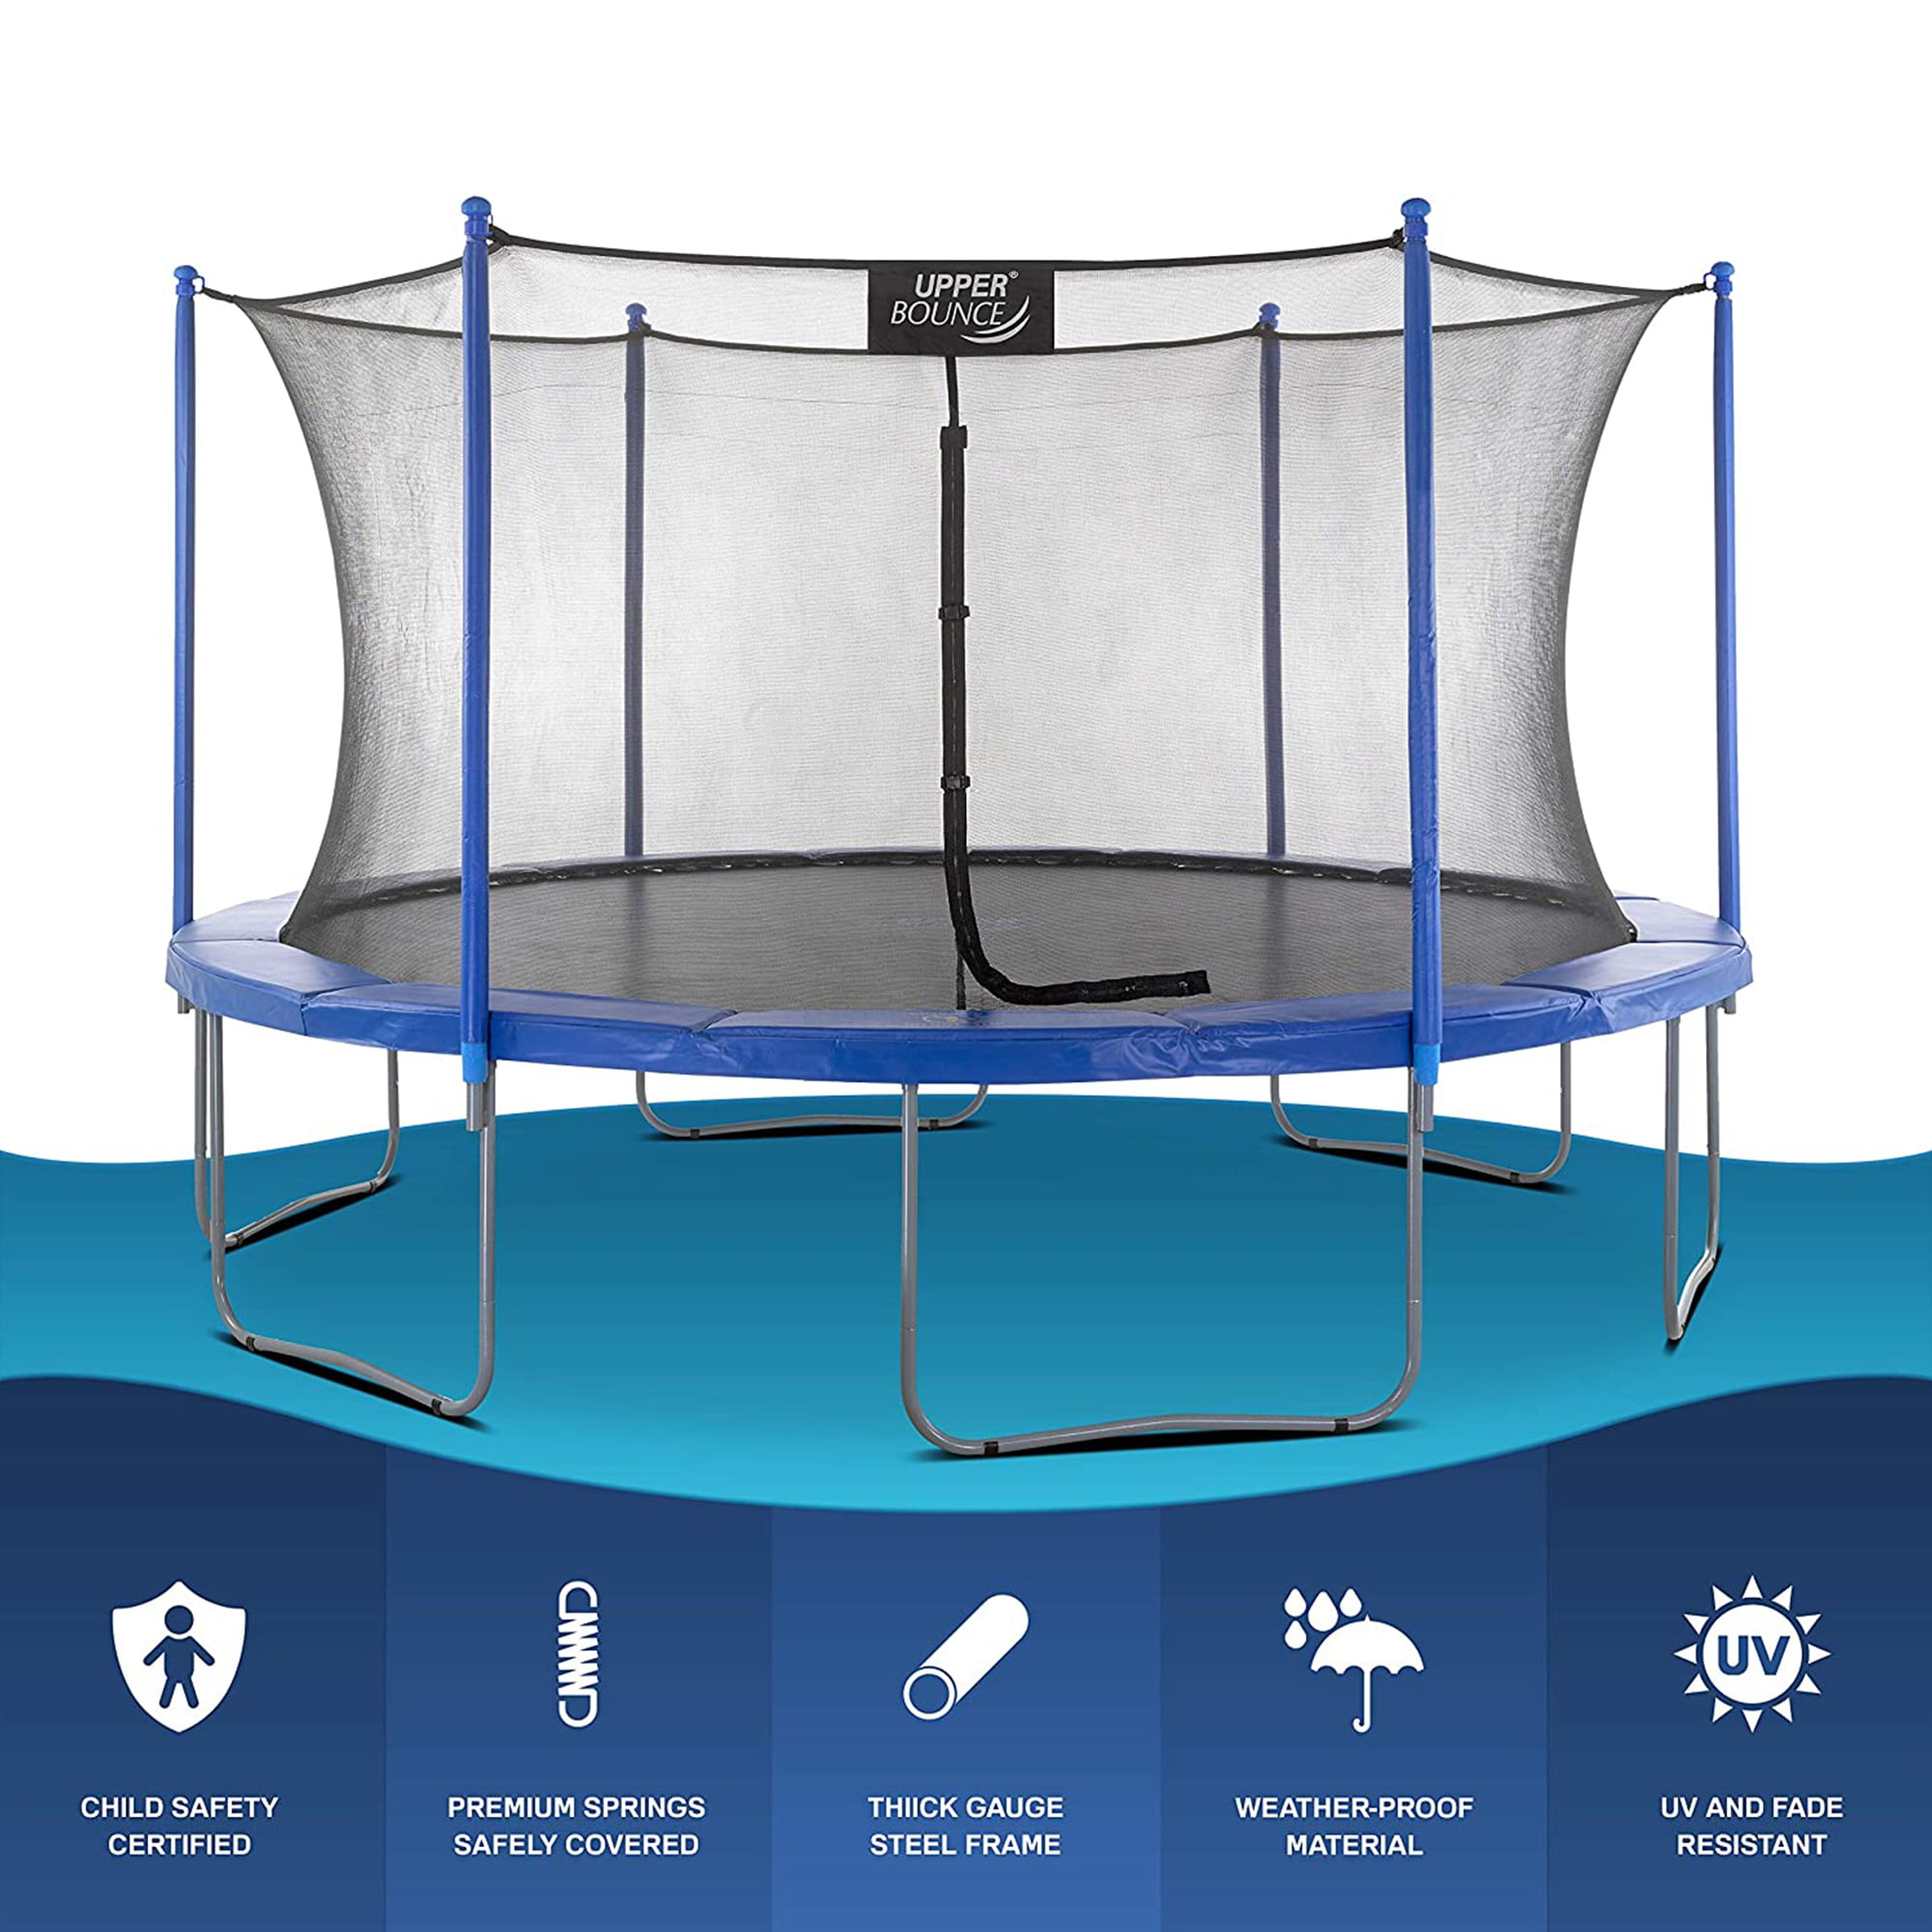 Upper Bounce 10 ft. Trampoline and Enclosure Set 